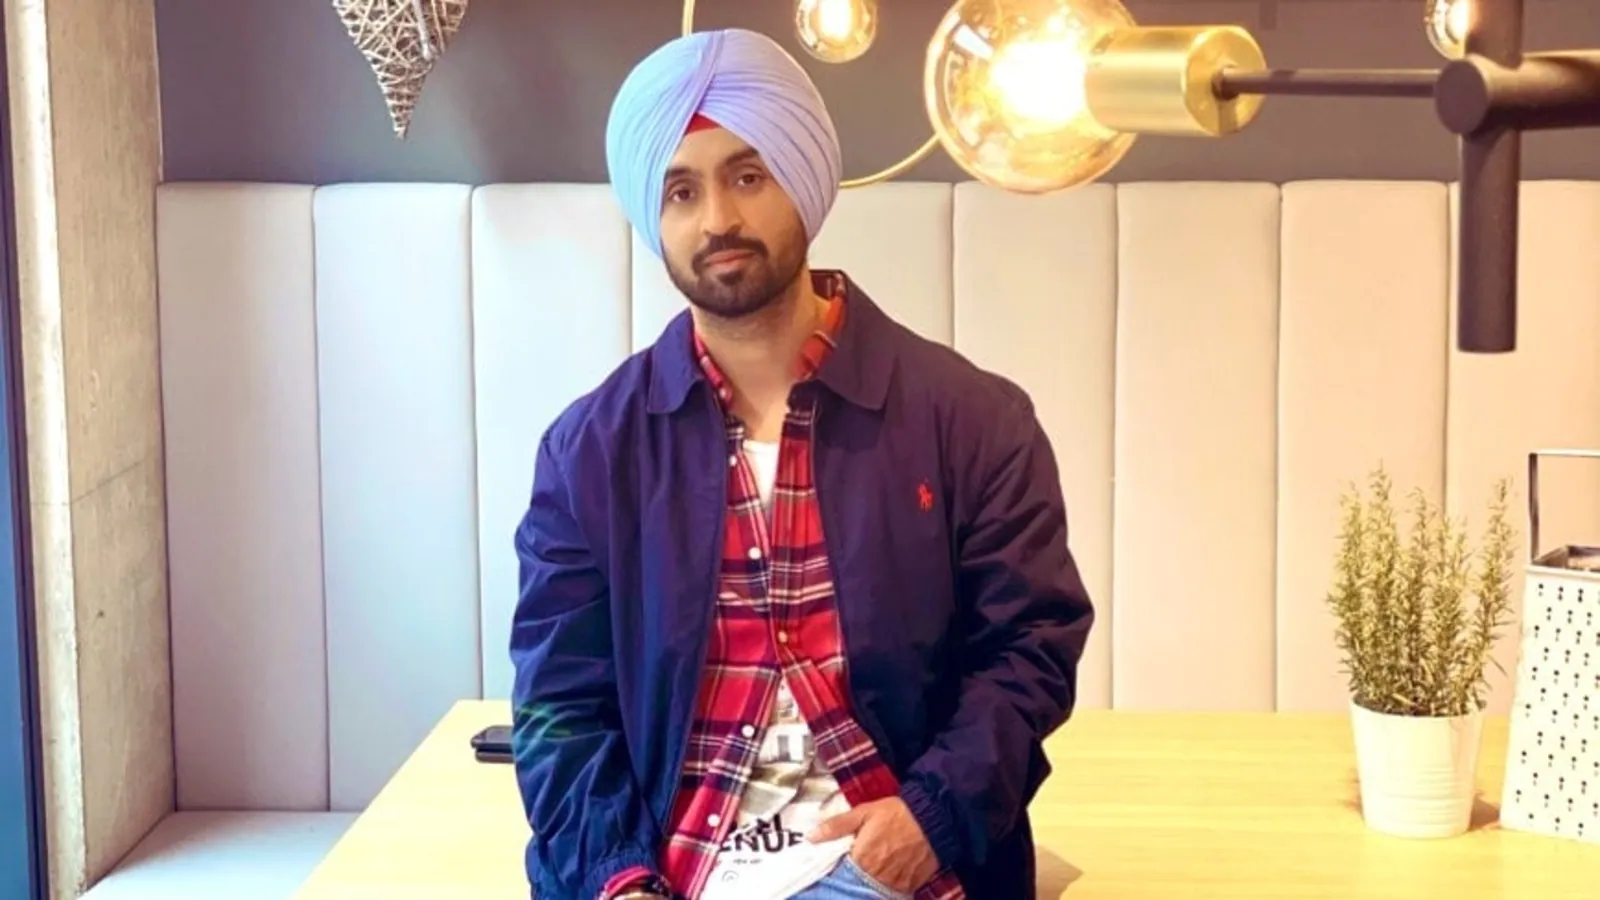 Diljit Dosanjh reacts as Twitter user asks about his ‘obsession with lip-syncing’ at concert: ‘Enu hardwork kende aa’